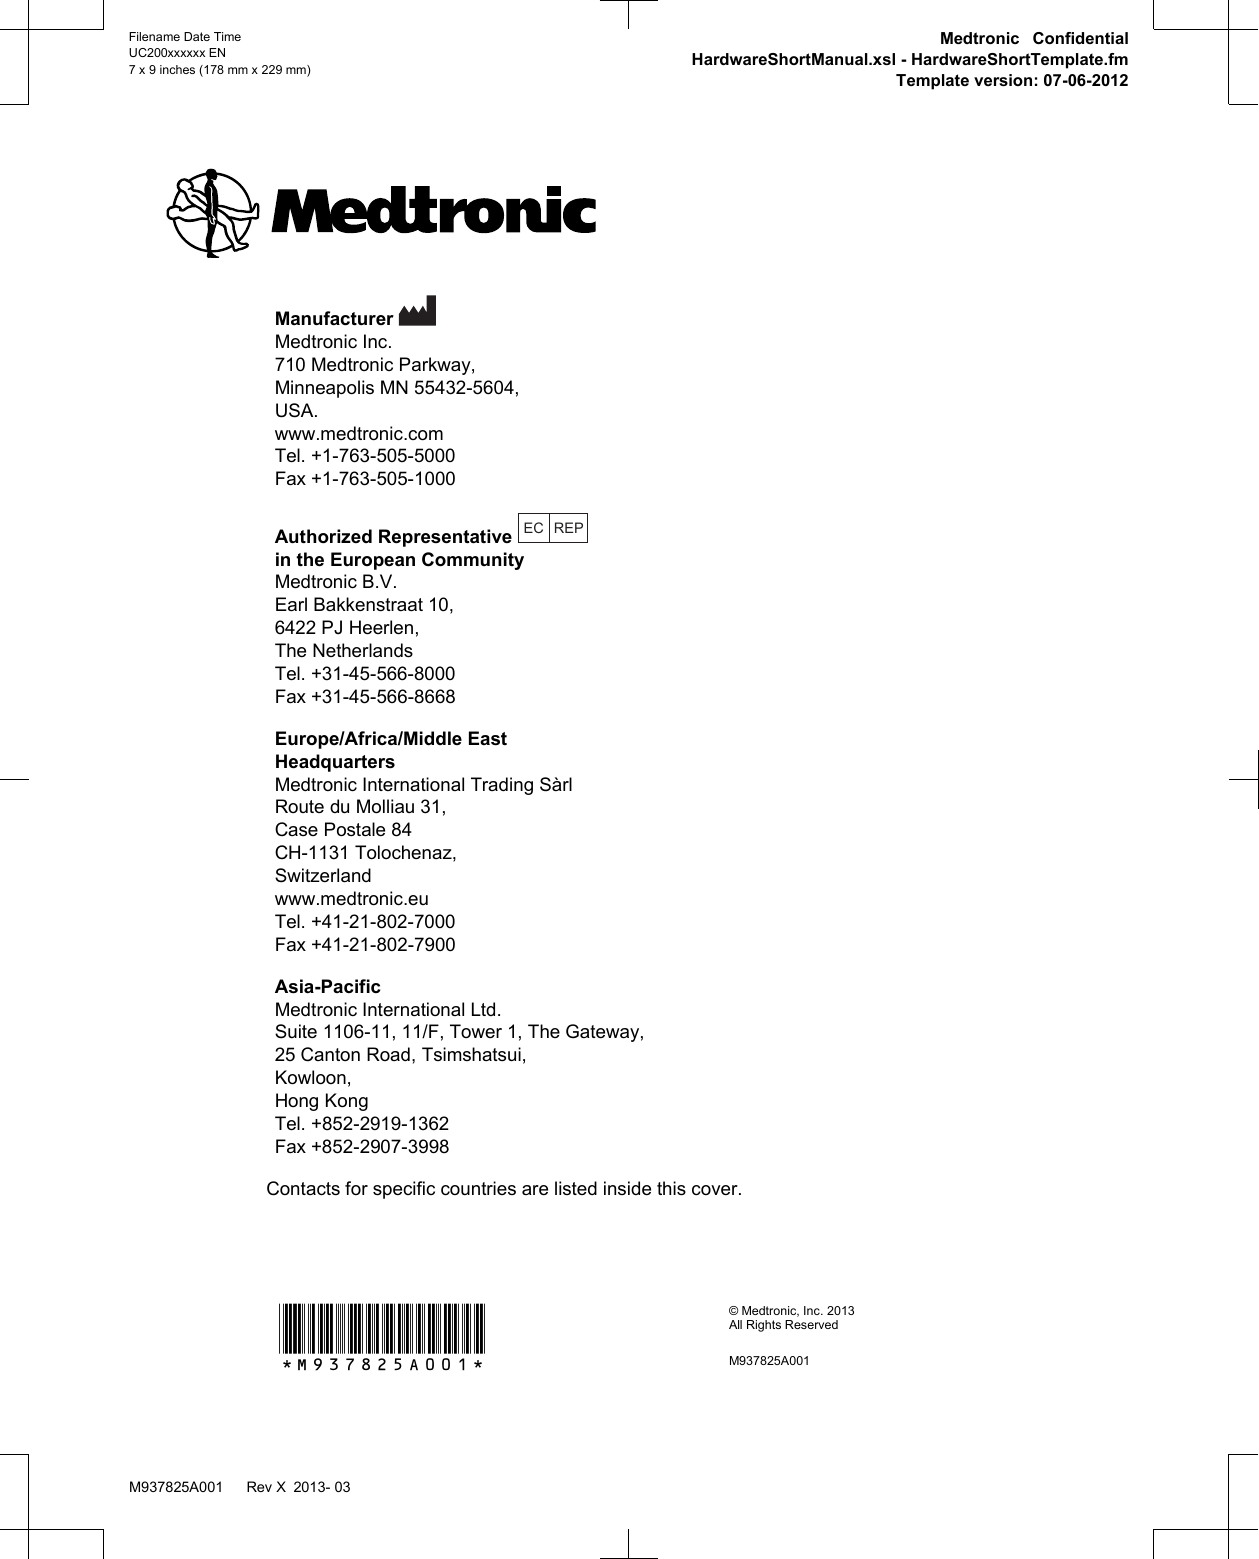 Manufacturer Medtronic Inc.710 Medtronic Parkway,Minneapolis MN 55432-5604,USA.www.medtronic.comTel. +1-763-505-5000Fax +1-763-505-1000Authorized Representative EC REPin the European CommunityMedtronic B.V.Earl Bakkenstraat 10,6422 PJ Heerlen,The NetherlandsTel. +31-45-566-8000Fax +31-45-566-8668Europe/Africa/Middle EastHeadquartersMedtronic International Trading SàrlRoute du Molliau 31,Case Postale 84CH-1131 Tolochenaz,Switzerlandwww.medtronic.euTel. +41-21-802-7000Fax +41-21-802-7900Asia-PacificMedtronic International Ltd.Suite 1106-11, 11/F, Tower 1, The Gateway,25 Canton Road, Tsimshatsui,Kowloon,Hong KongTel. +852-2919-1362Fax +852-2907-3998Contacts for specific countries are listed inside this cover.*M937825A001*© Medtronic, Inc. 2013All Rights ReservedM937825A001Filename Date TimeUC200xxxxxx EN7 x 9 inches (178 mm x 229 mm)Medtronic ConfidentialHardwareShortManual.xsl - HardwareShortTemplate.fmTemplate version: 07-06-2012M937825A001   Rev X 2013- 03